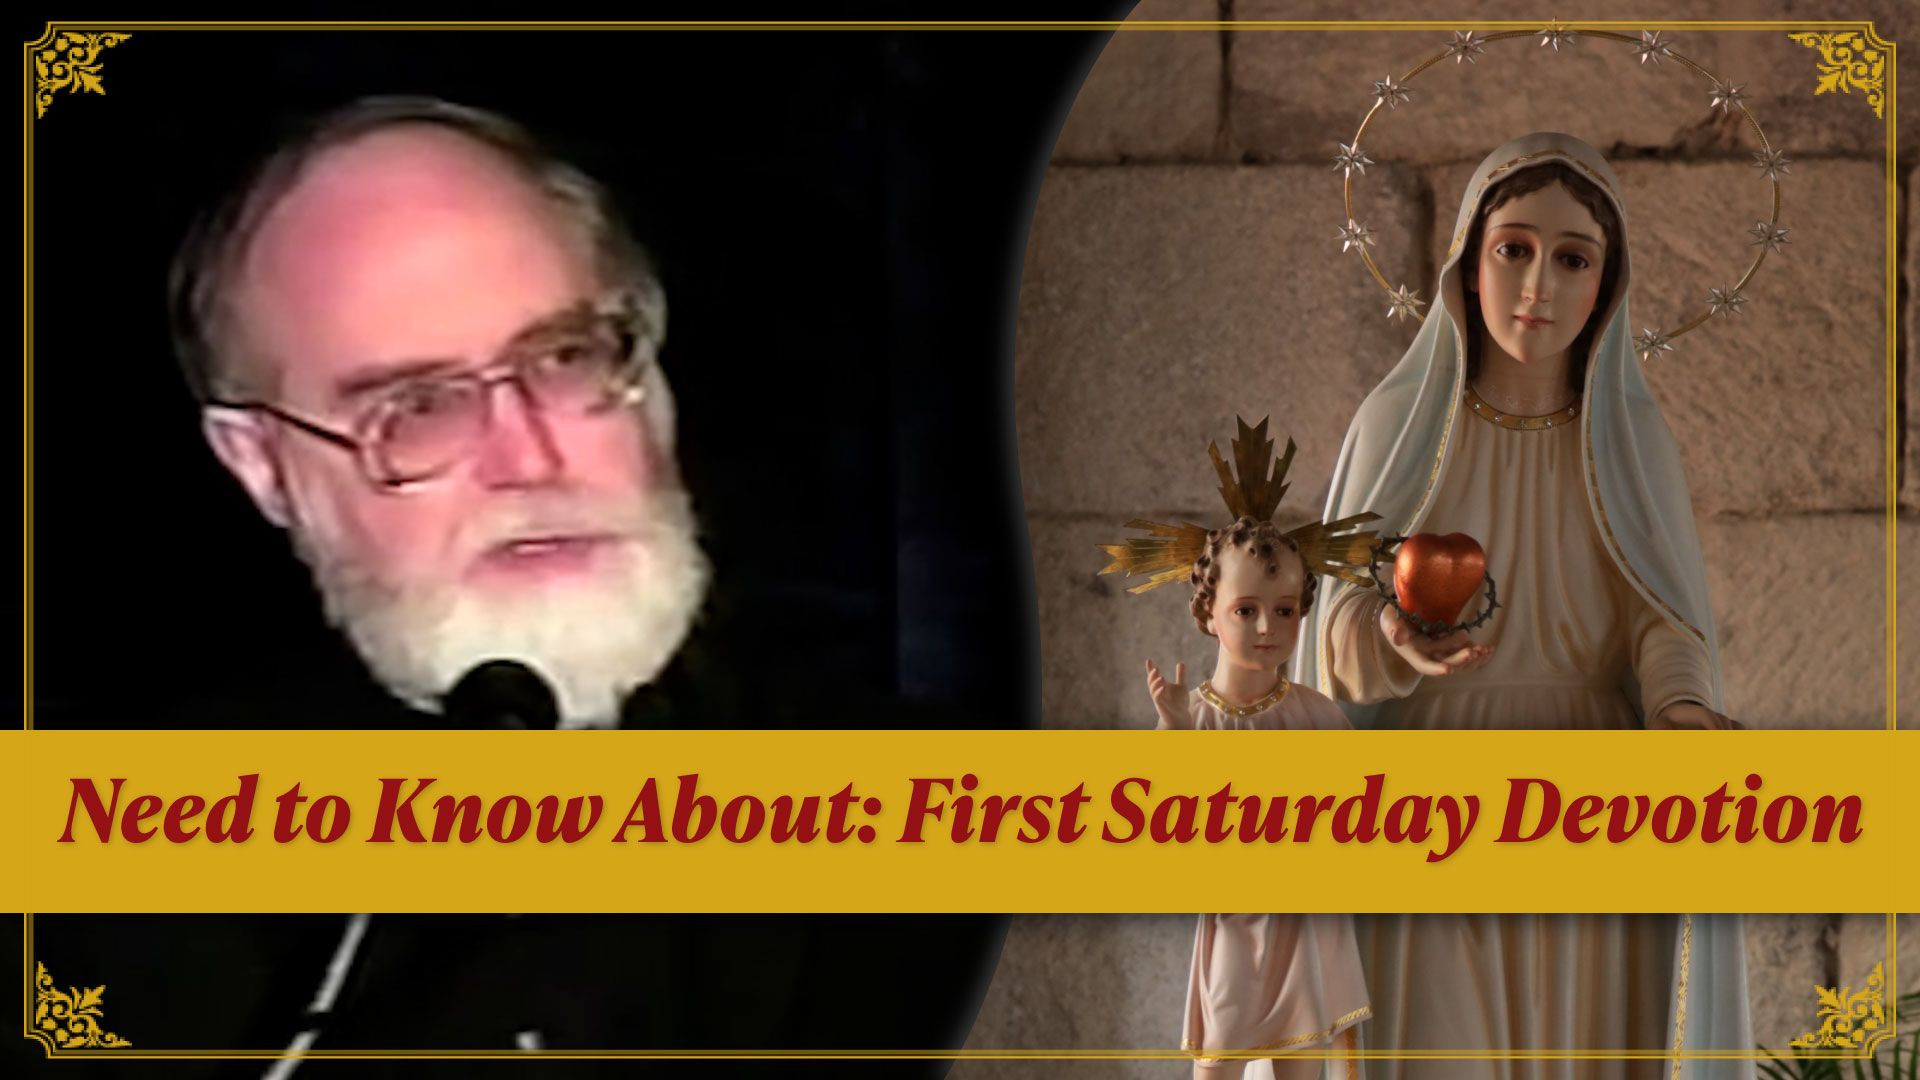 First thing you need to know about the First Saturday Devotion